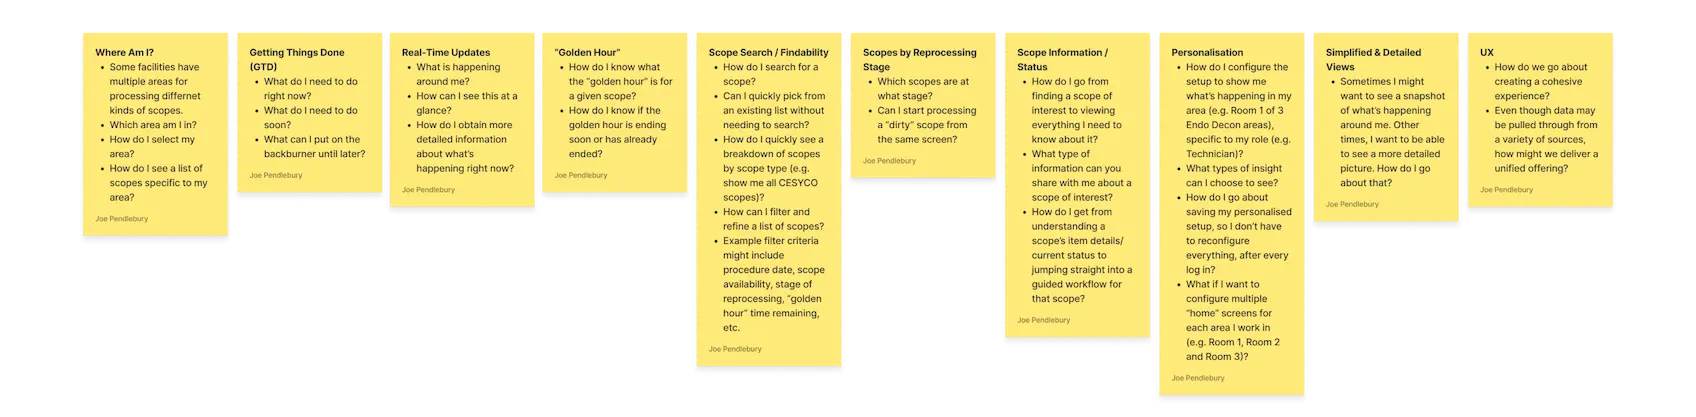 Key themes extracted from the brainstorming session are reframed as questions reflecting user needs, guiding further exploration and design decisions.